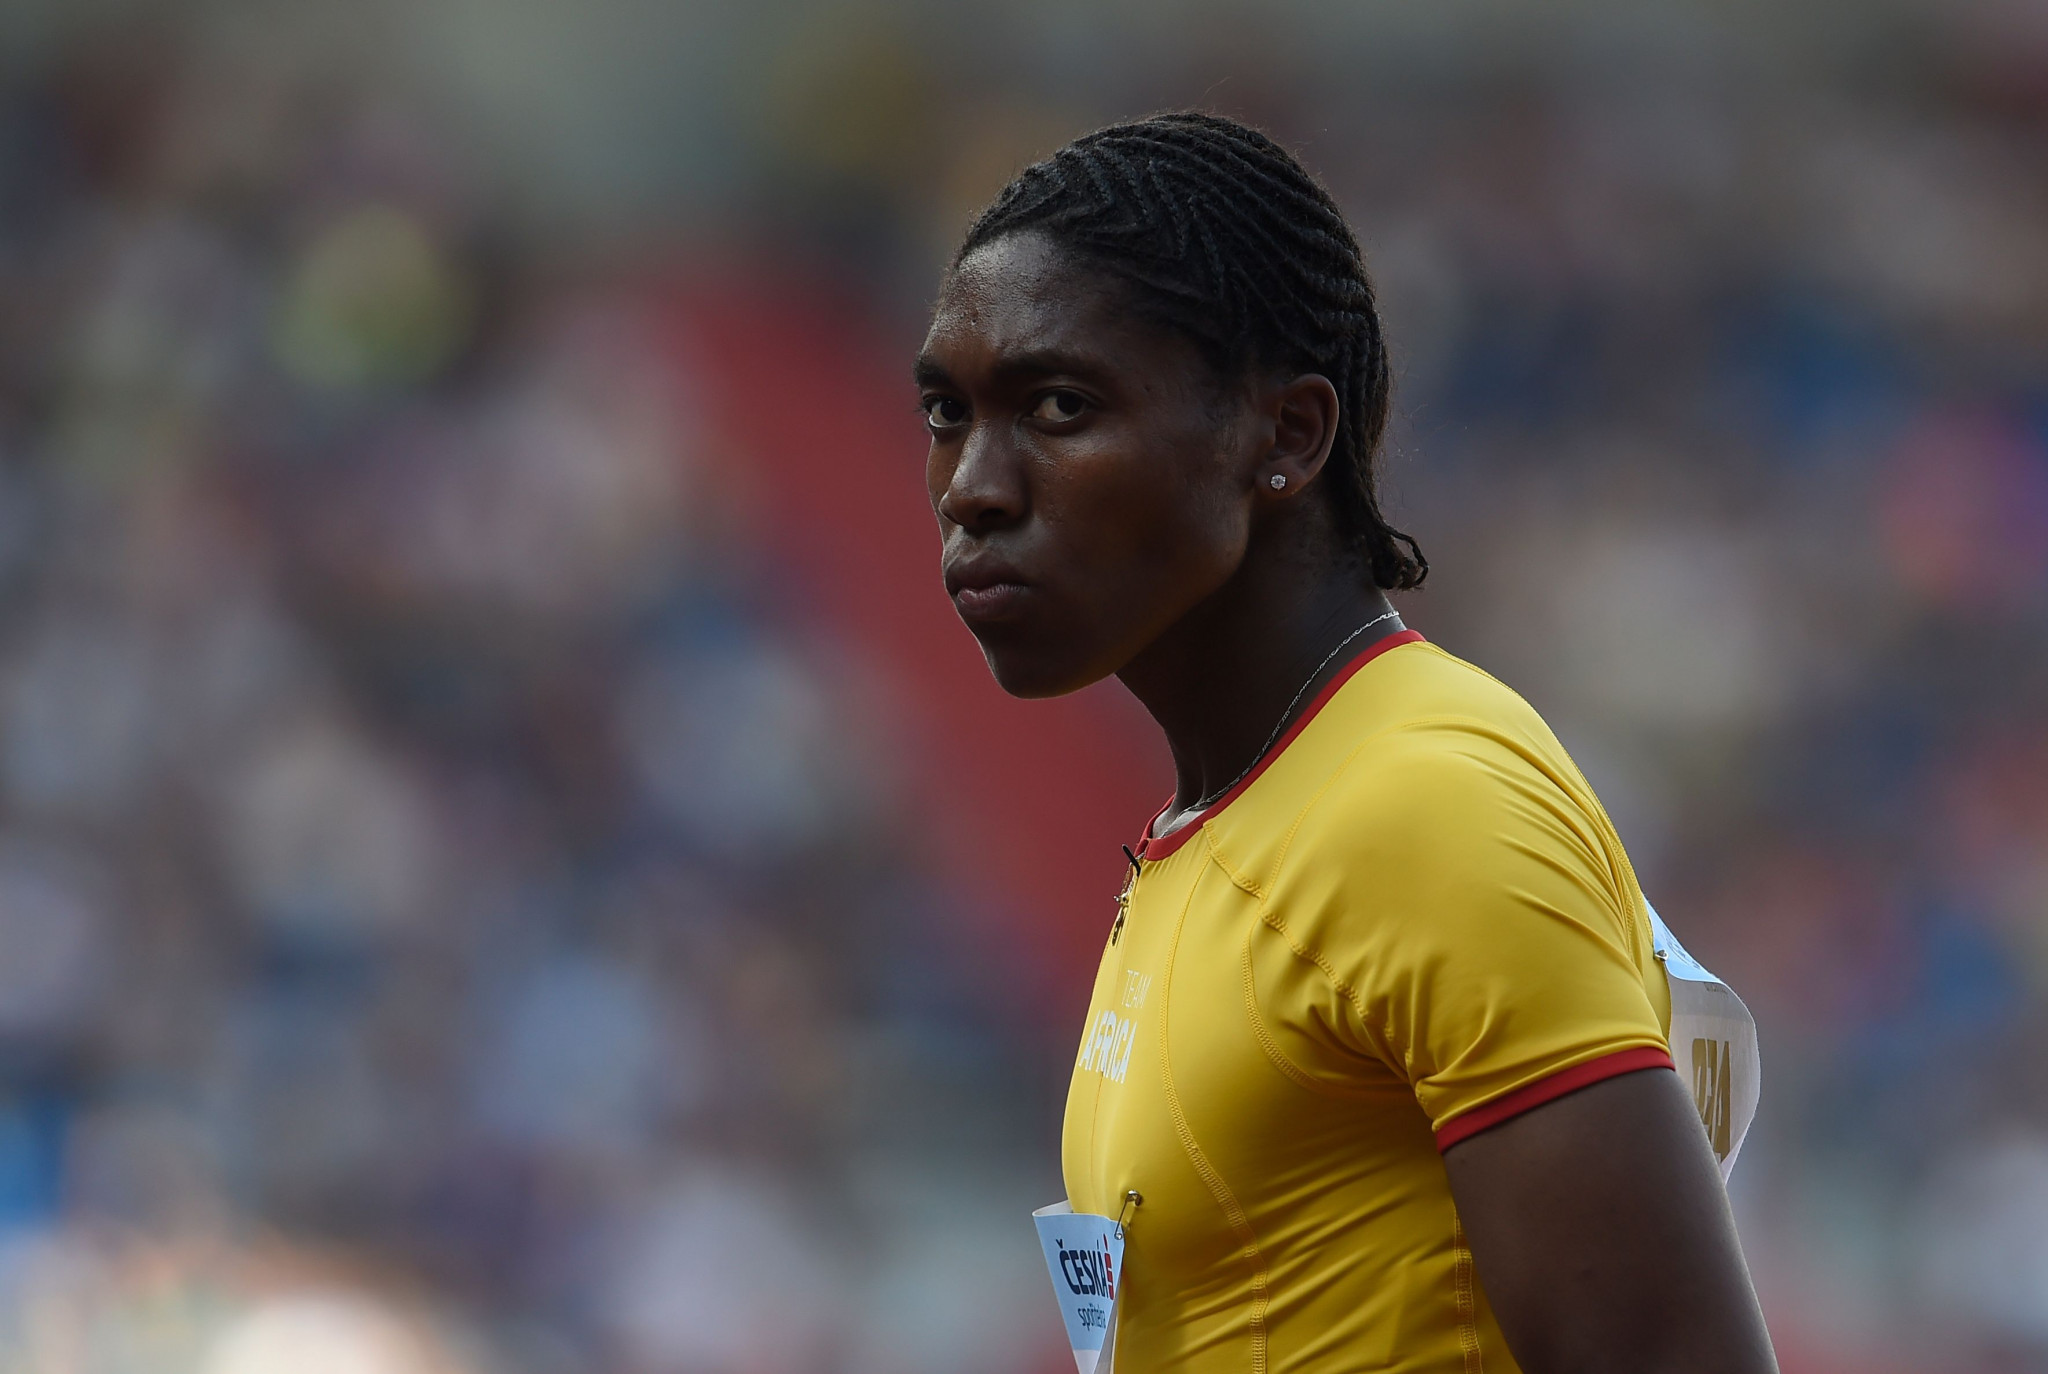 South Africa's Caster Semenya could be banned from competing against women if the CAS rules against her ©Getty Images